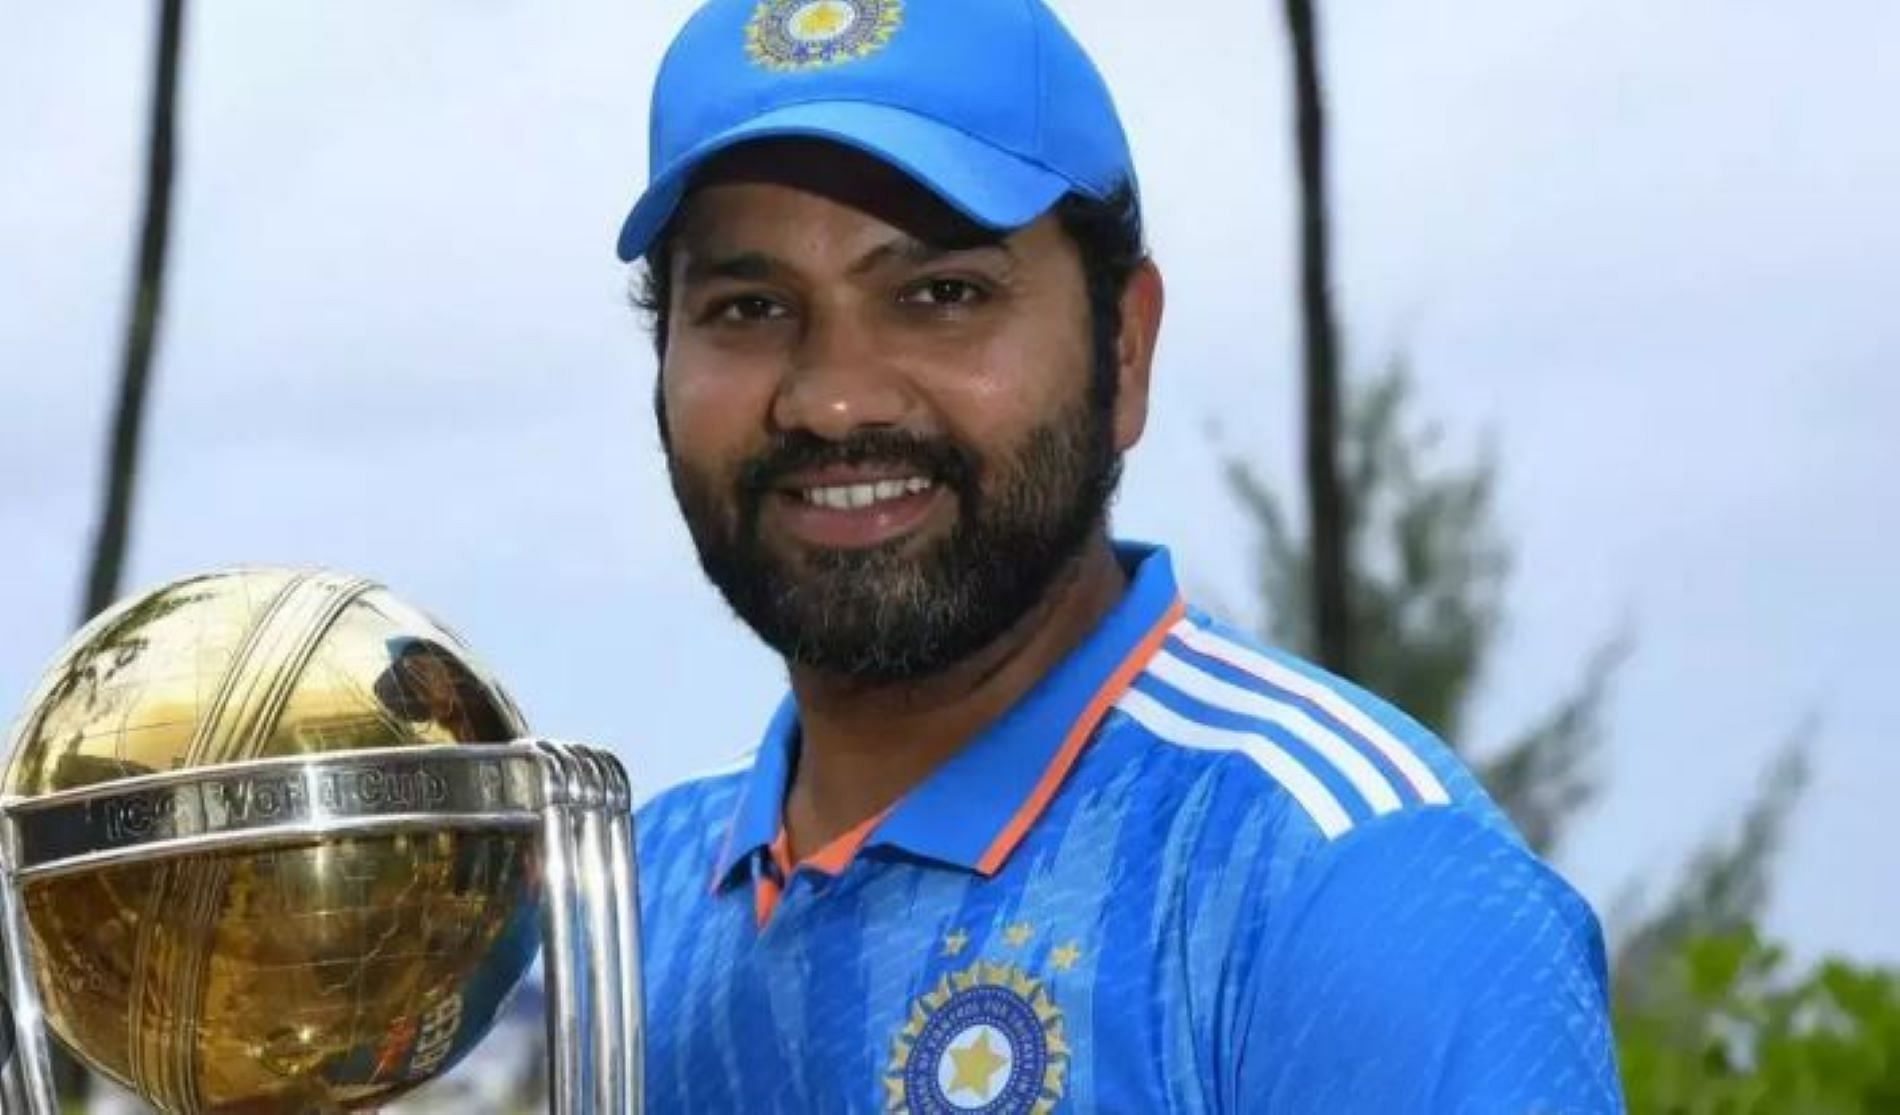 Rohit Sharma will hope to loft the World Cup trophy on November 19.